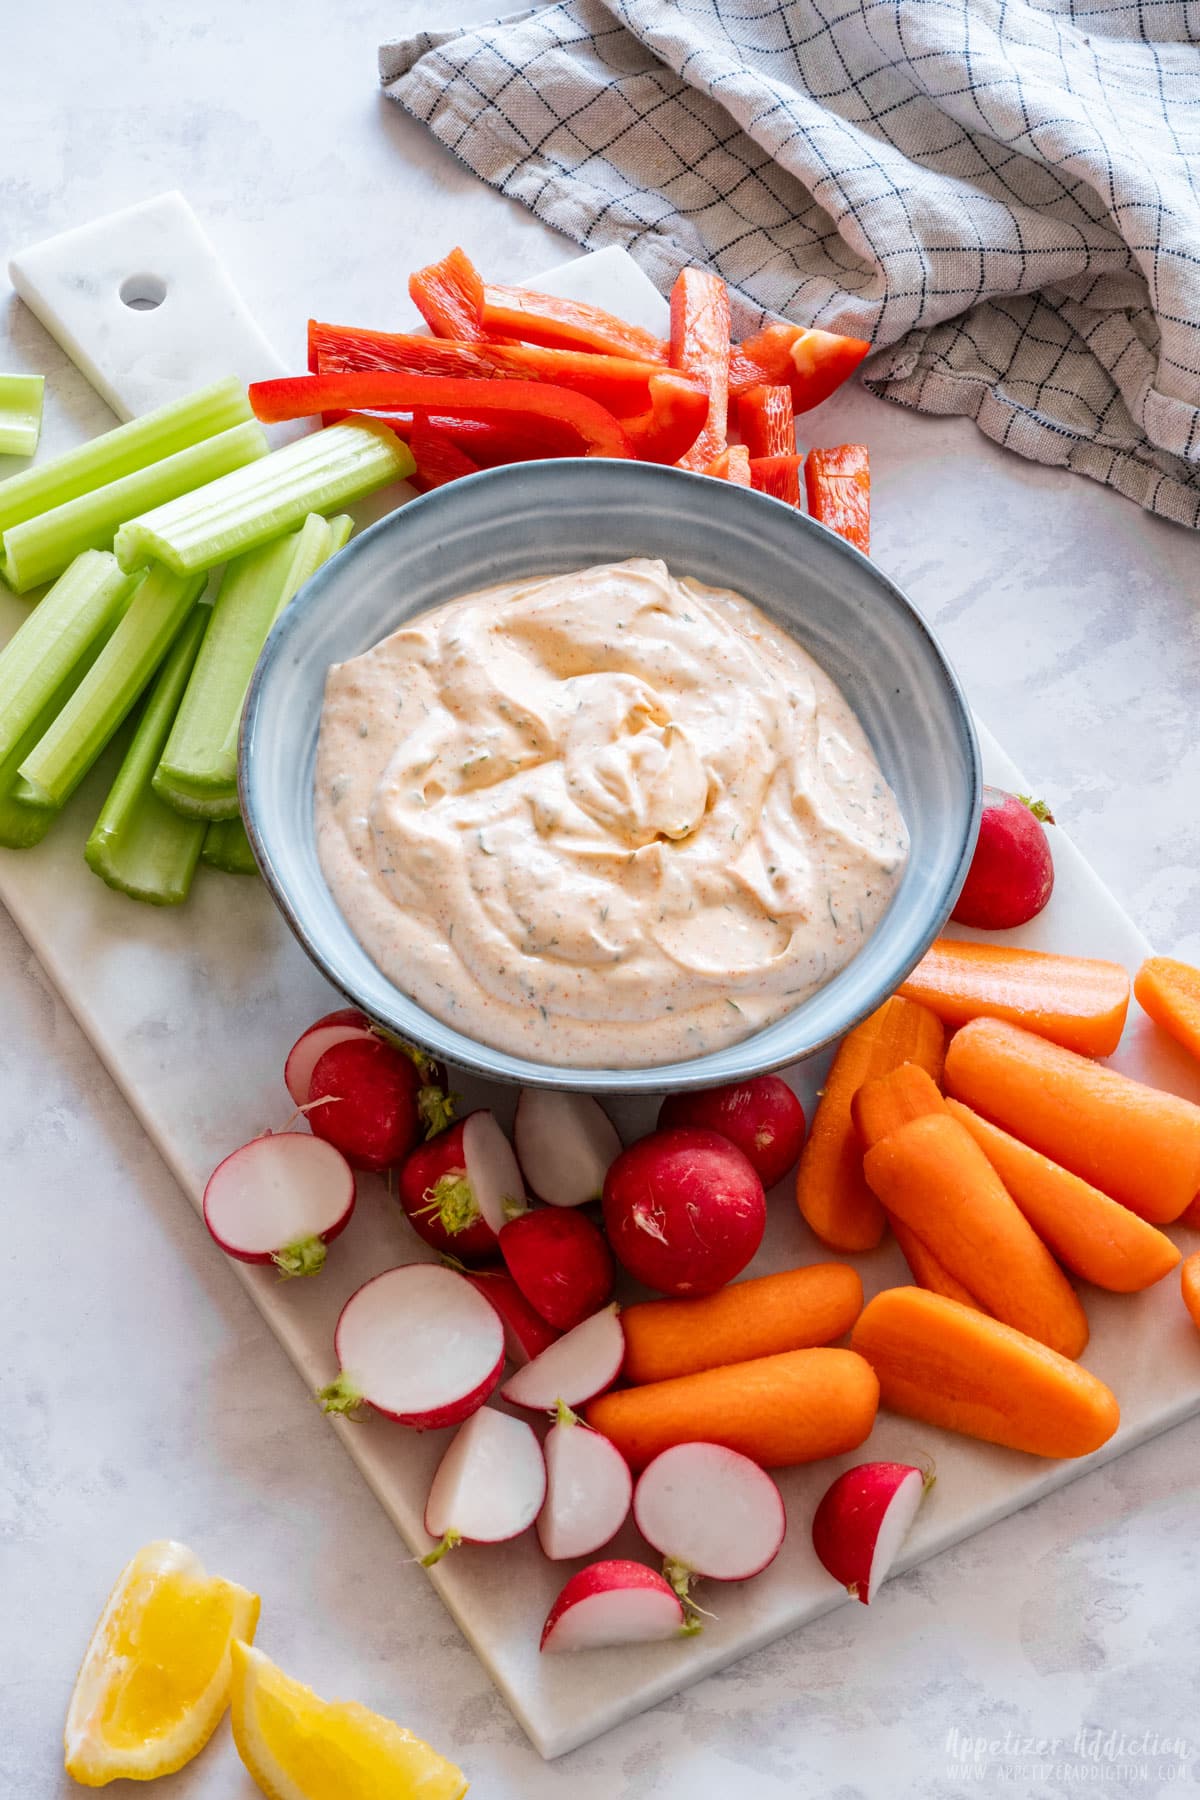 Vegetable dip with carrots, celery, peppers and radish.